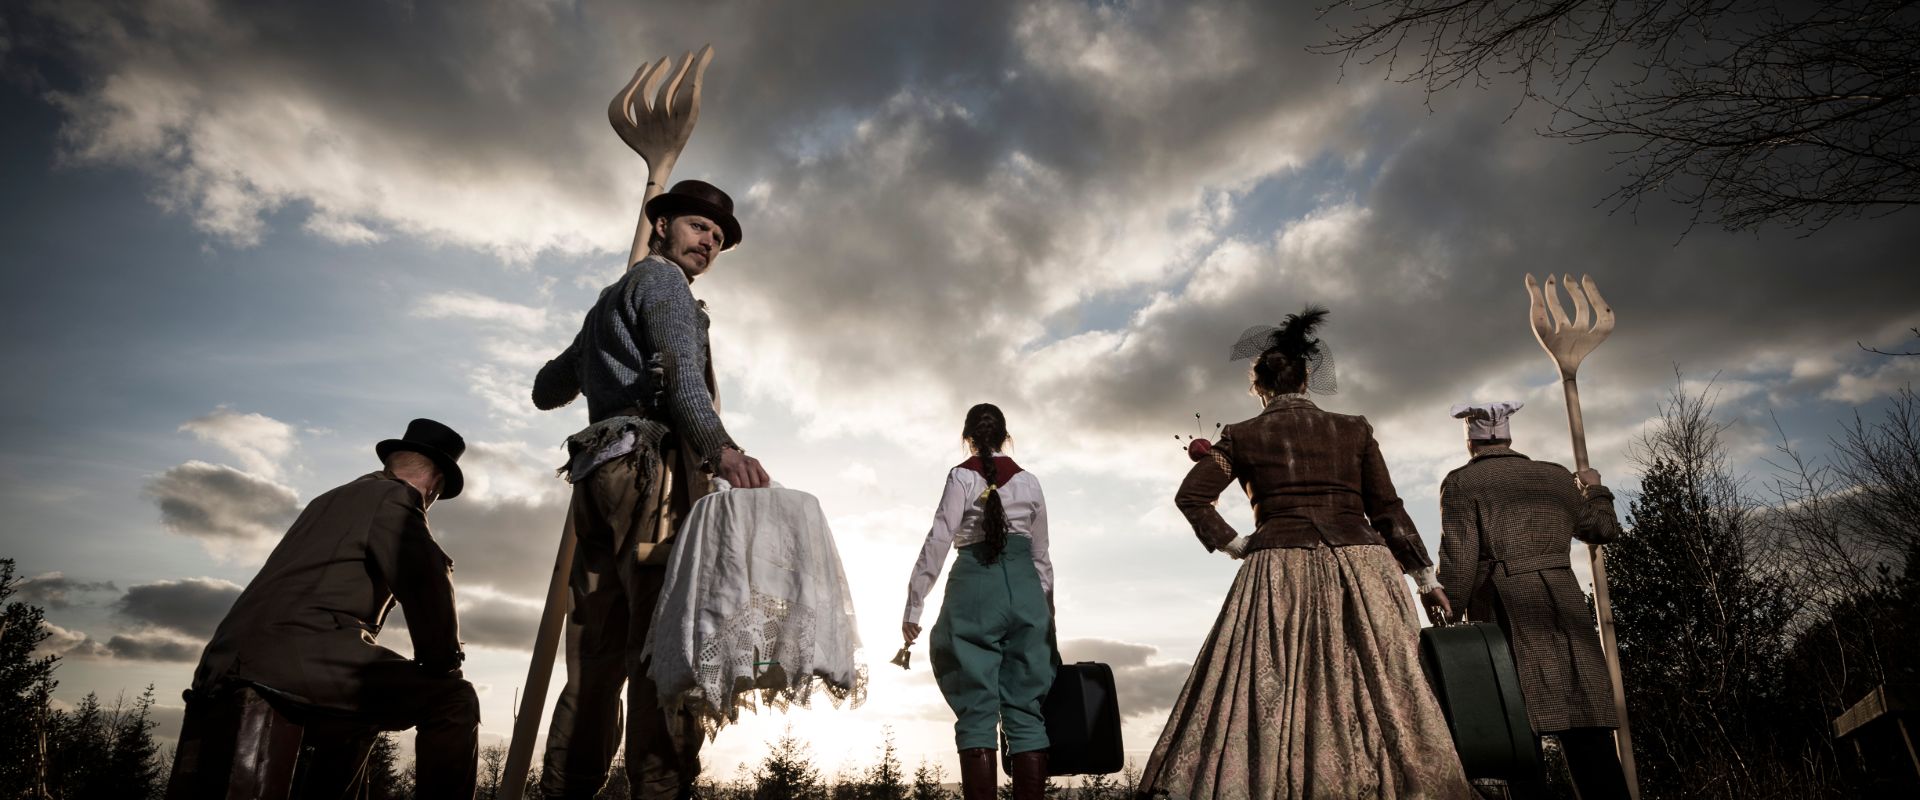 Promo image for Hunting of the Snark, The Banker, Isabelle, The Bonnet Maker, and The Baker look at into the sunset. Apart from The Butcher, holding a giant fork, faces us.